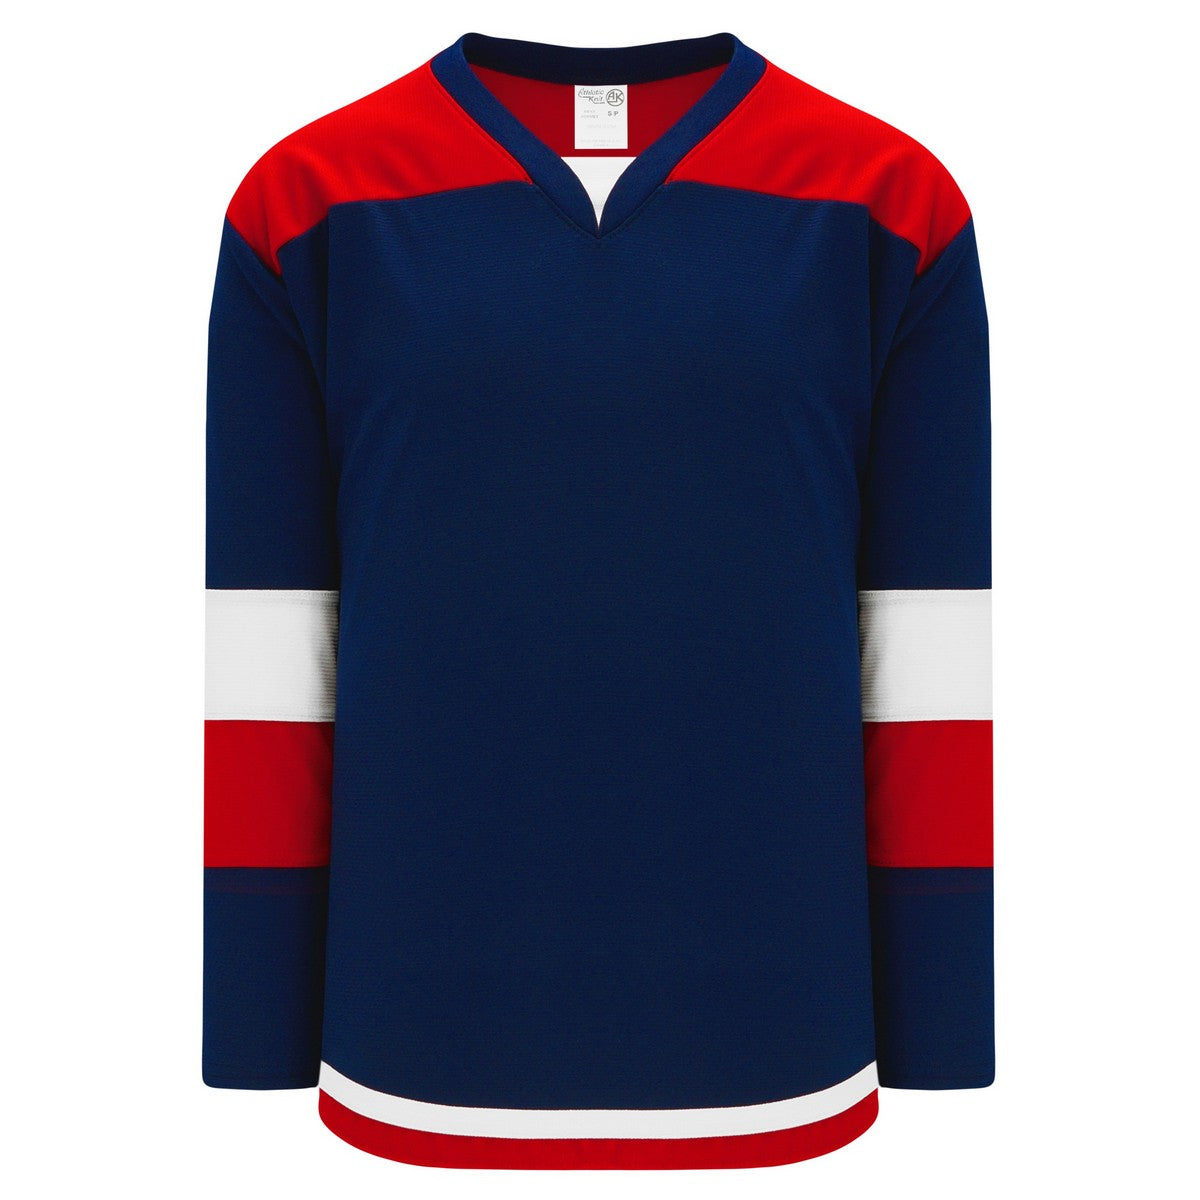 Select Series H7400 Jersey Navy Blue-Red